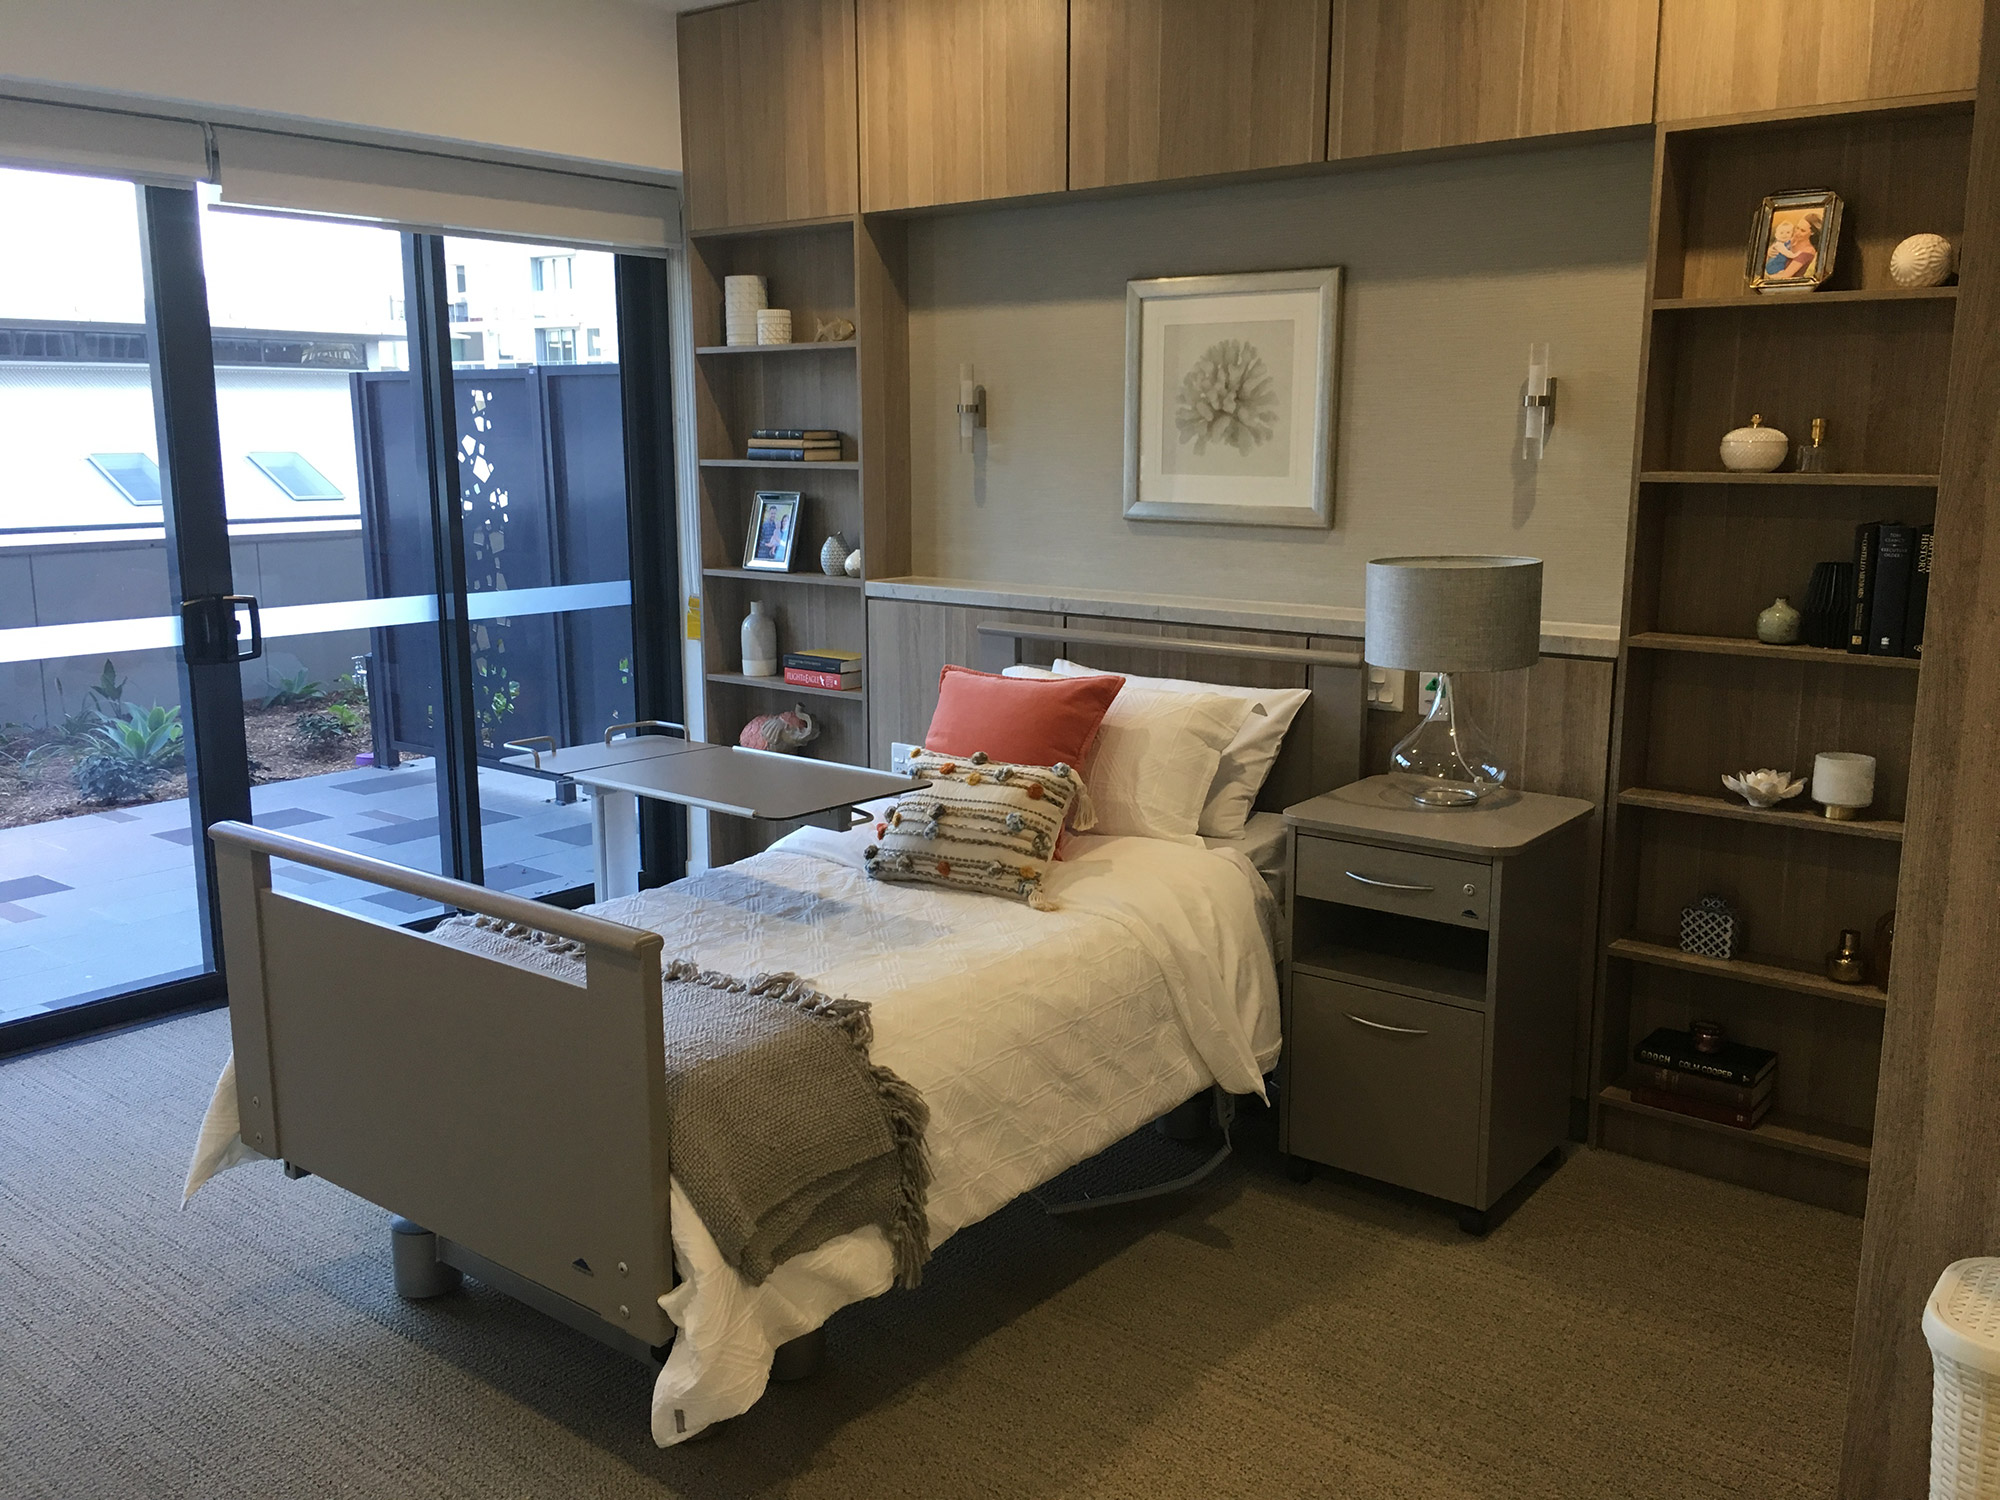 The care bed Libra in one of the rooms at AVEO Newstead.